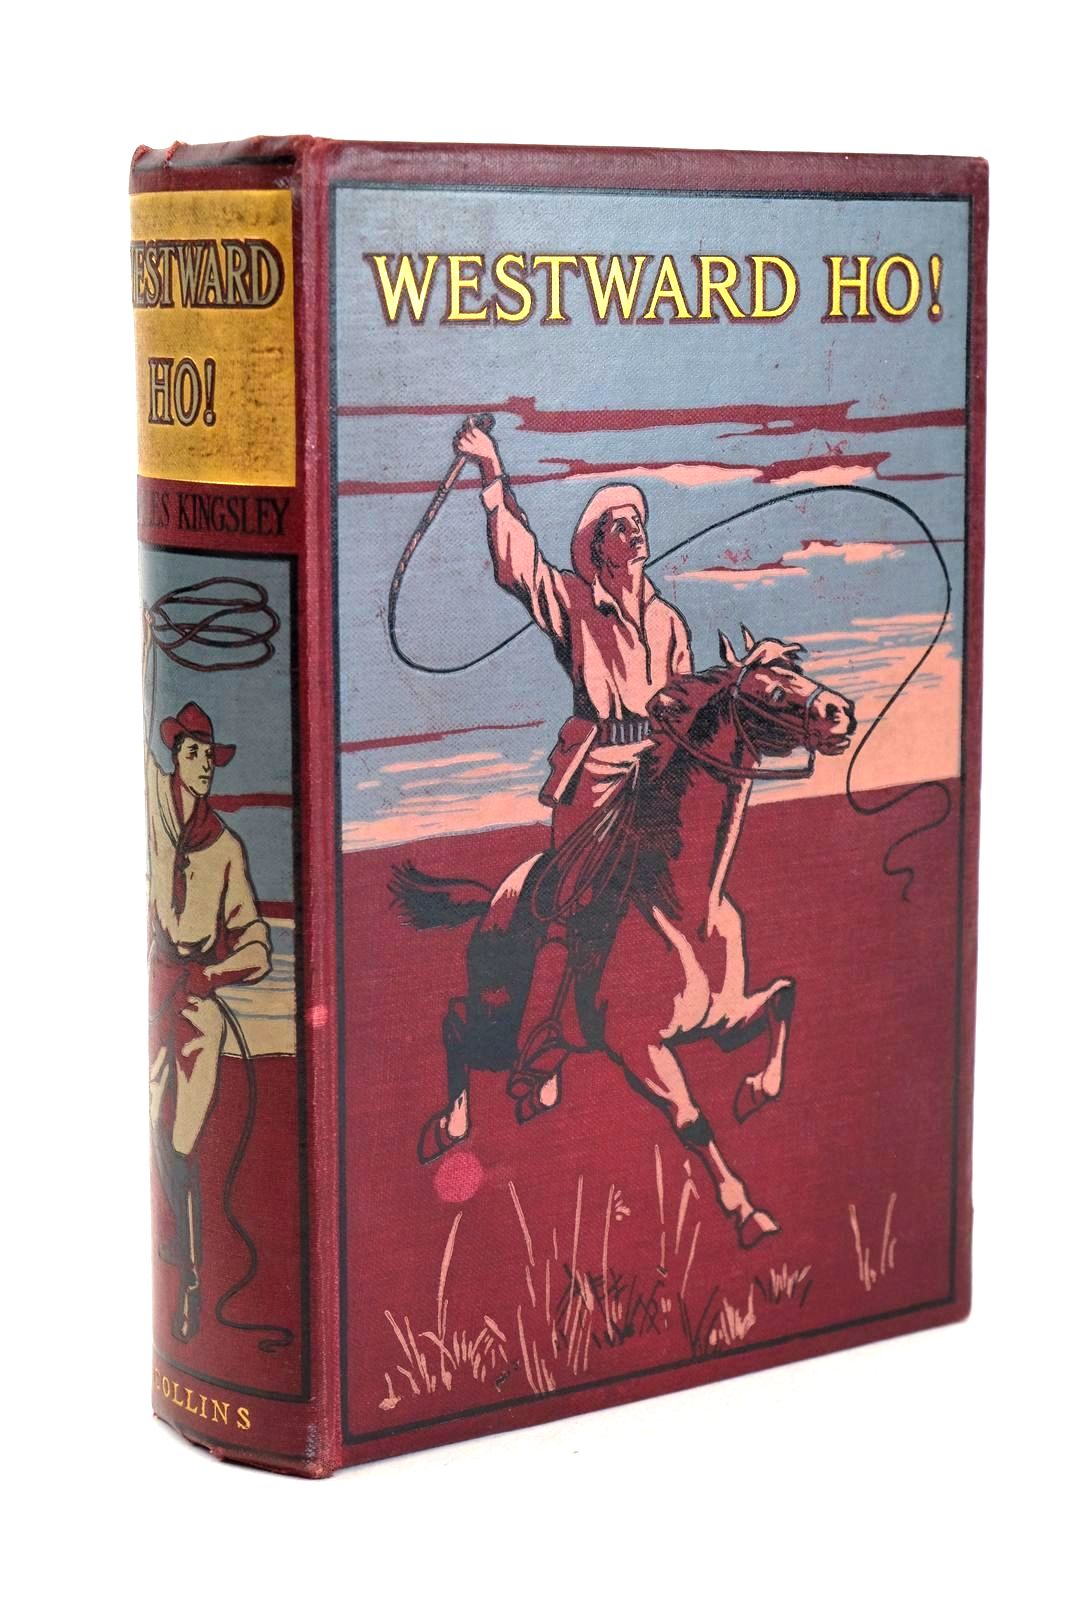 Photo of WESTWARD HO! written by Kingsley, Charles illustrated by Hindley, G.C. published by Collins Clear-Type Press (STOCK CODE: 1326438)  for sale by Stella & Rose's Books